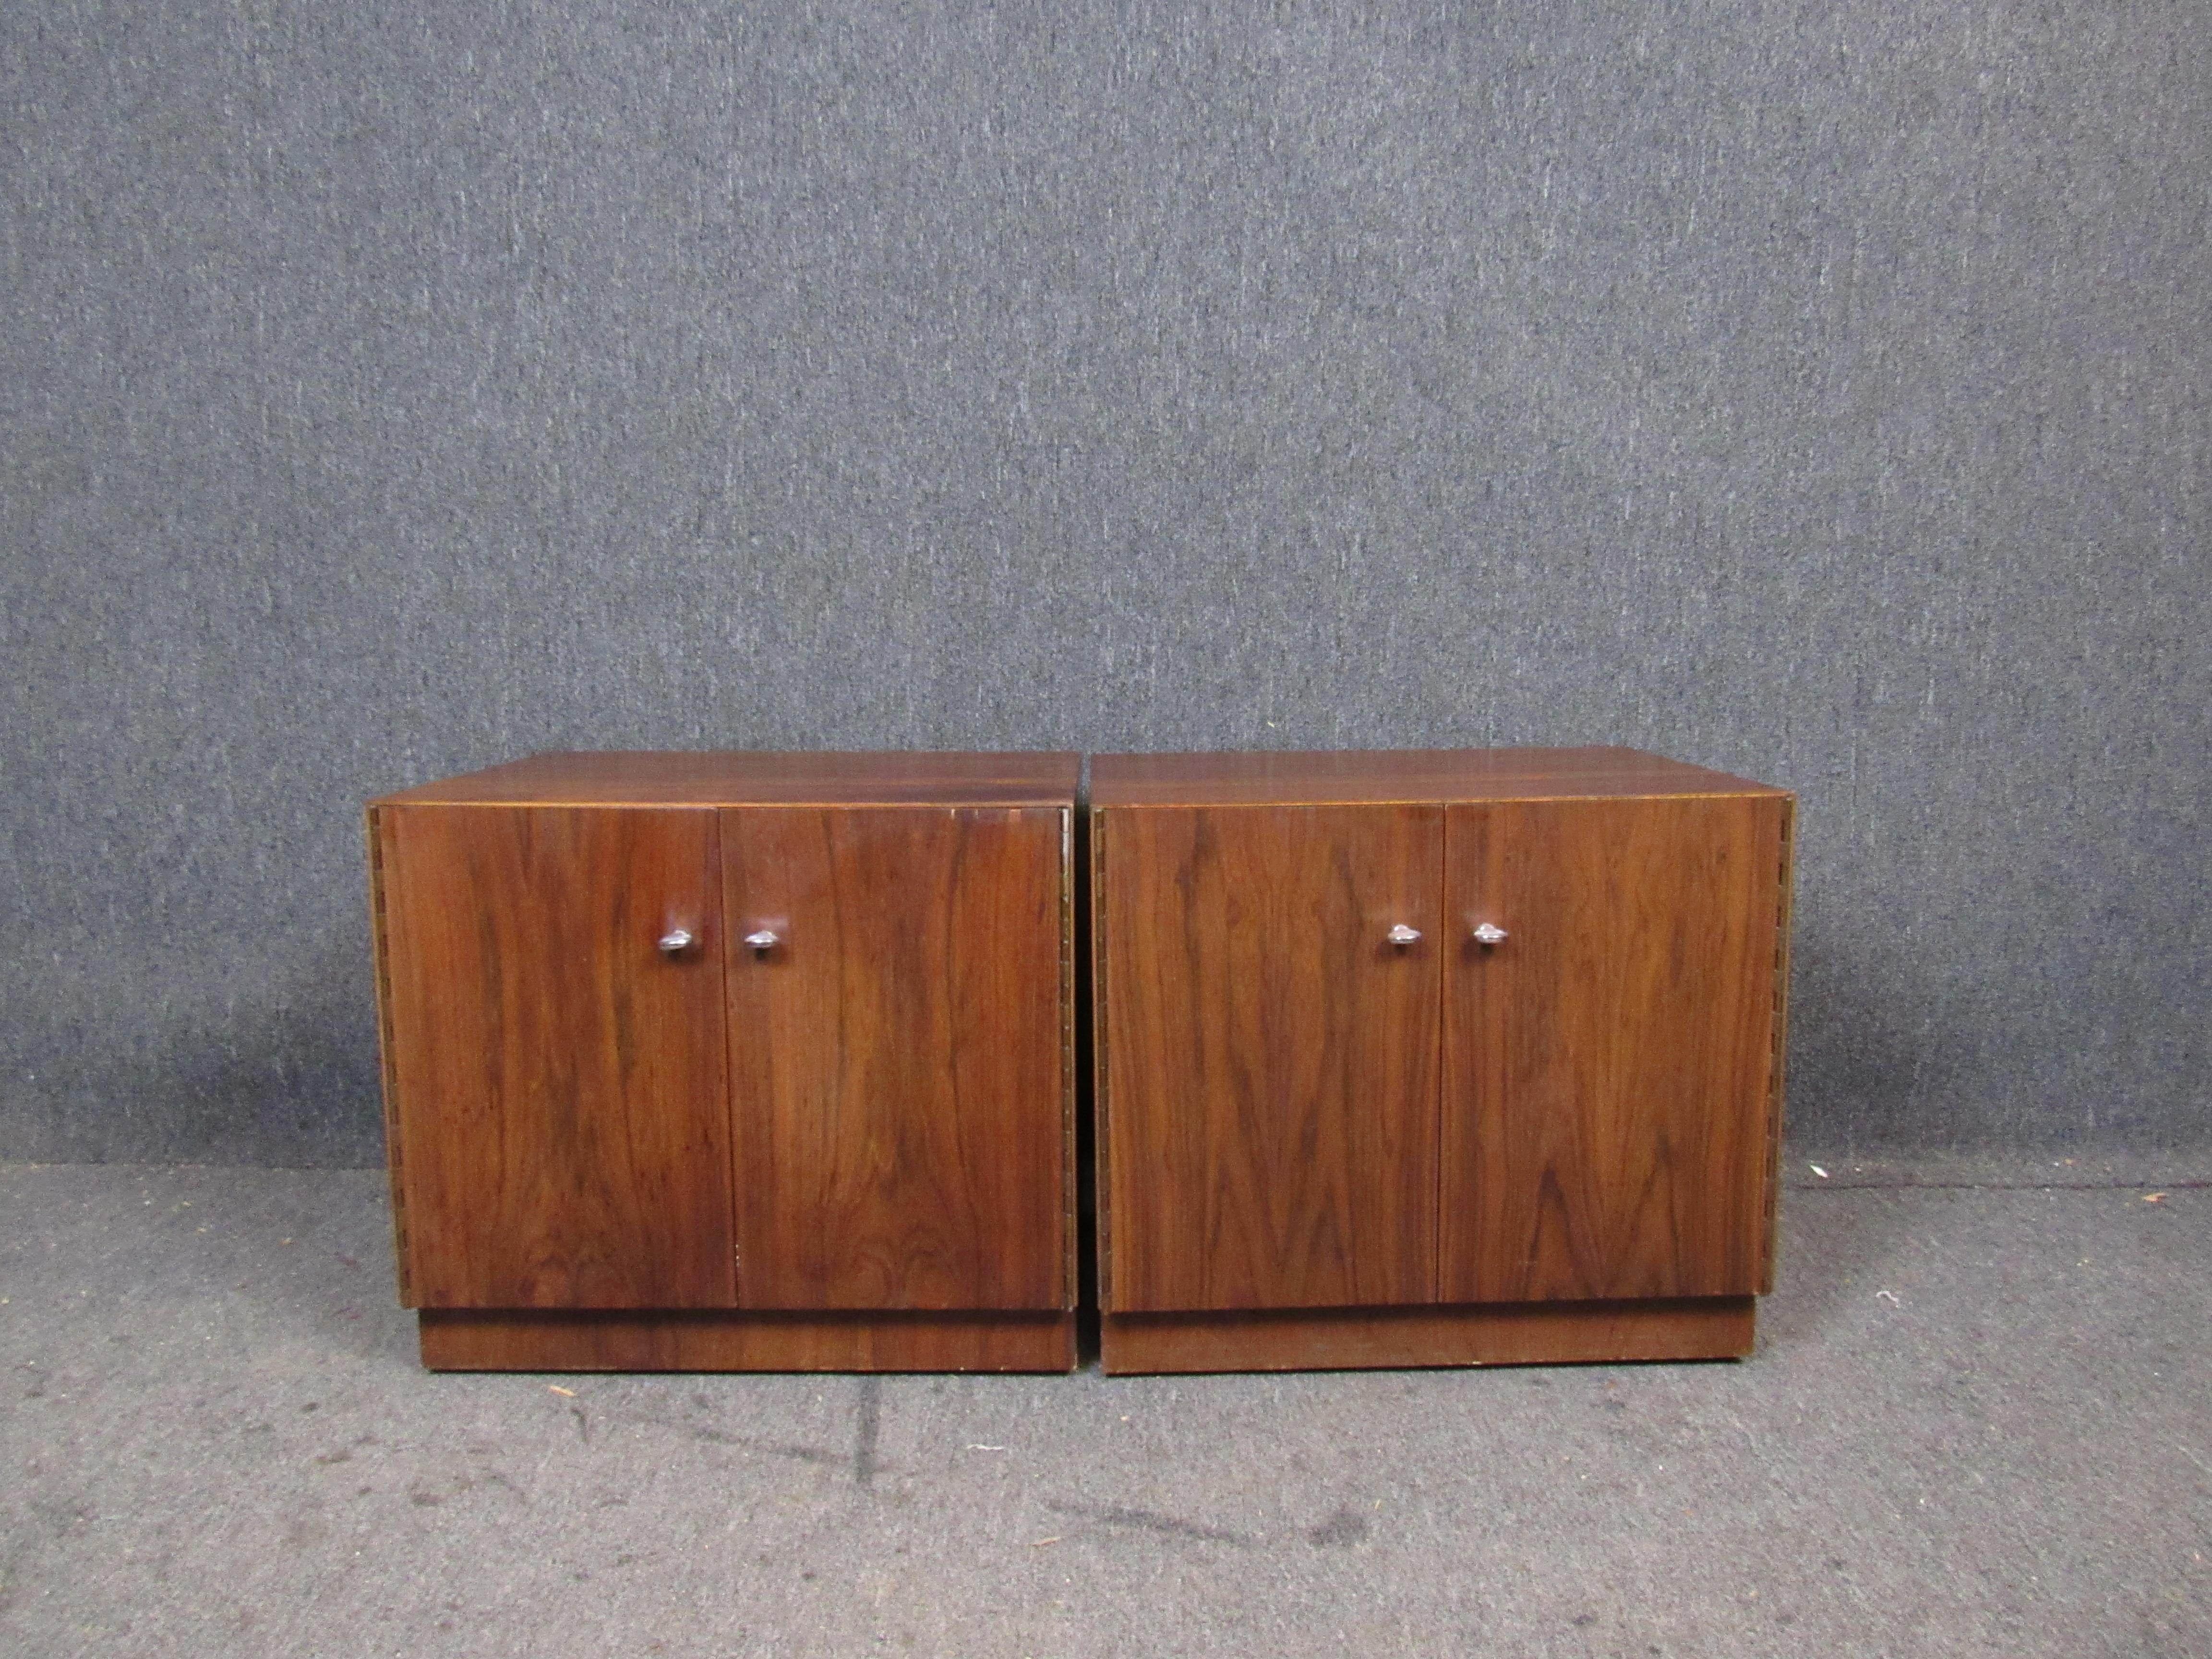 It's hip to be square with this awesome pair of cubic nightstands! Featuring a stunning rosewood wood grain and double doors that open to reveal ample storage space. Great for stacking to make the most of tight spaces. Please confirm item pickup